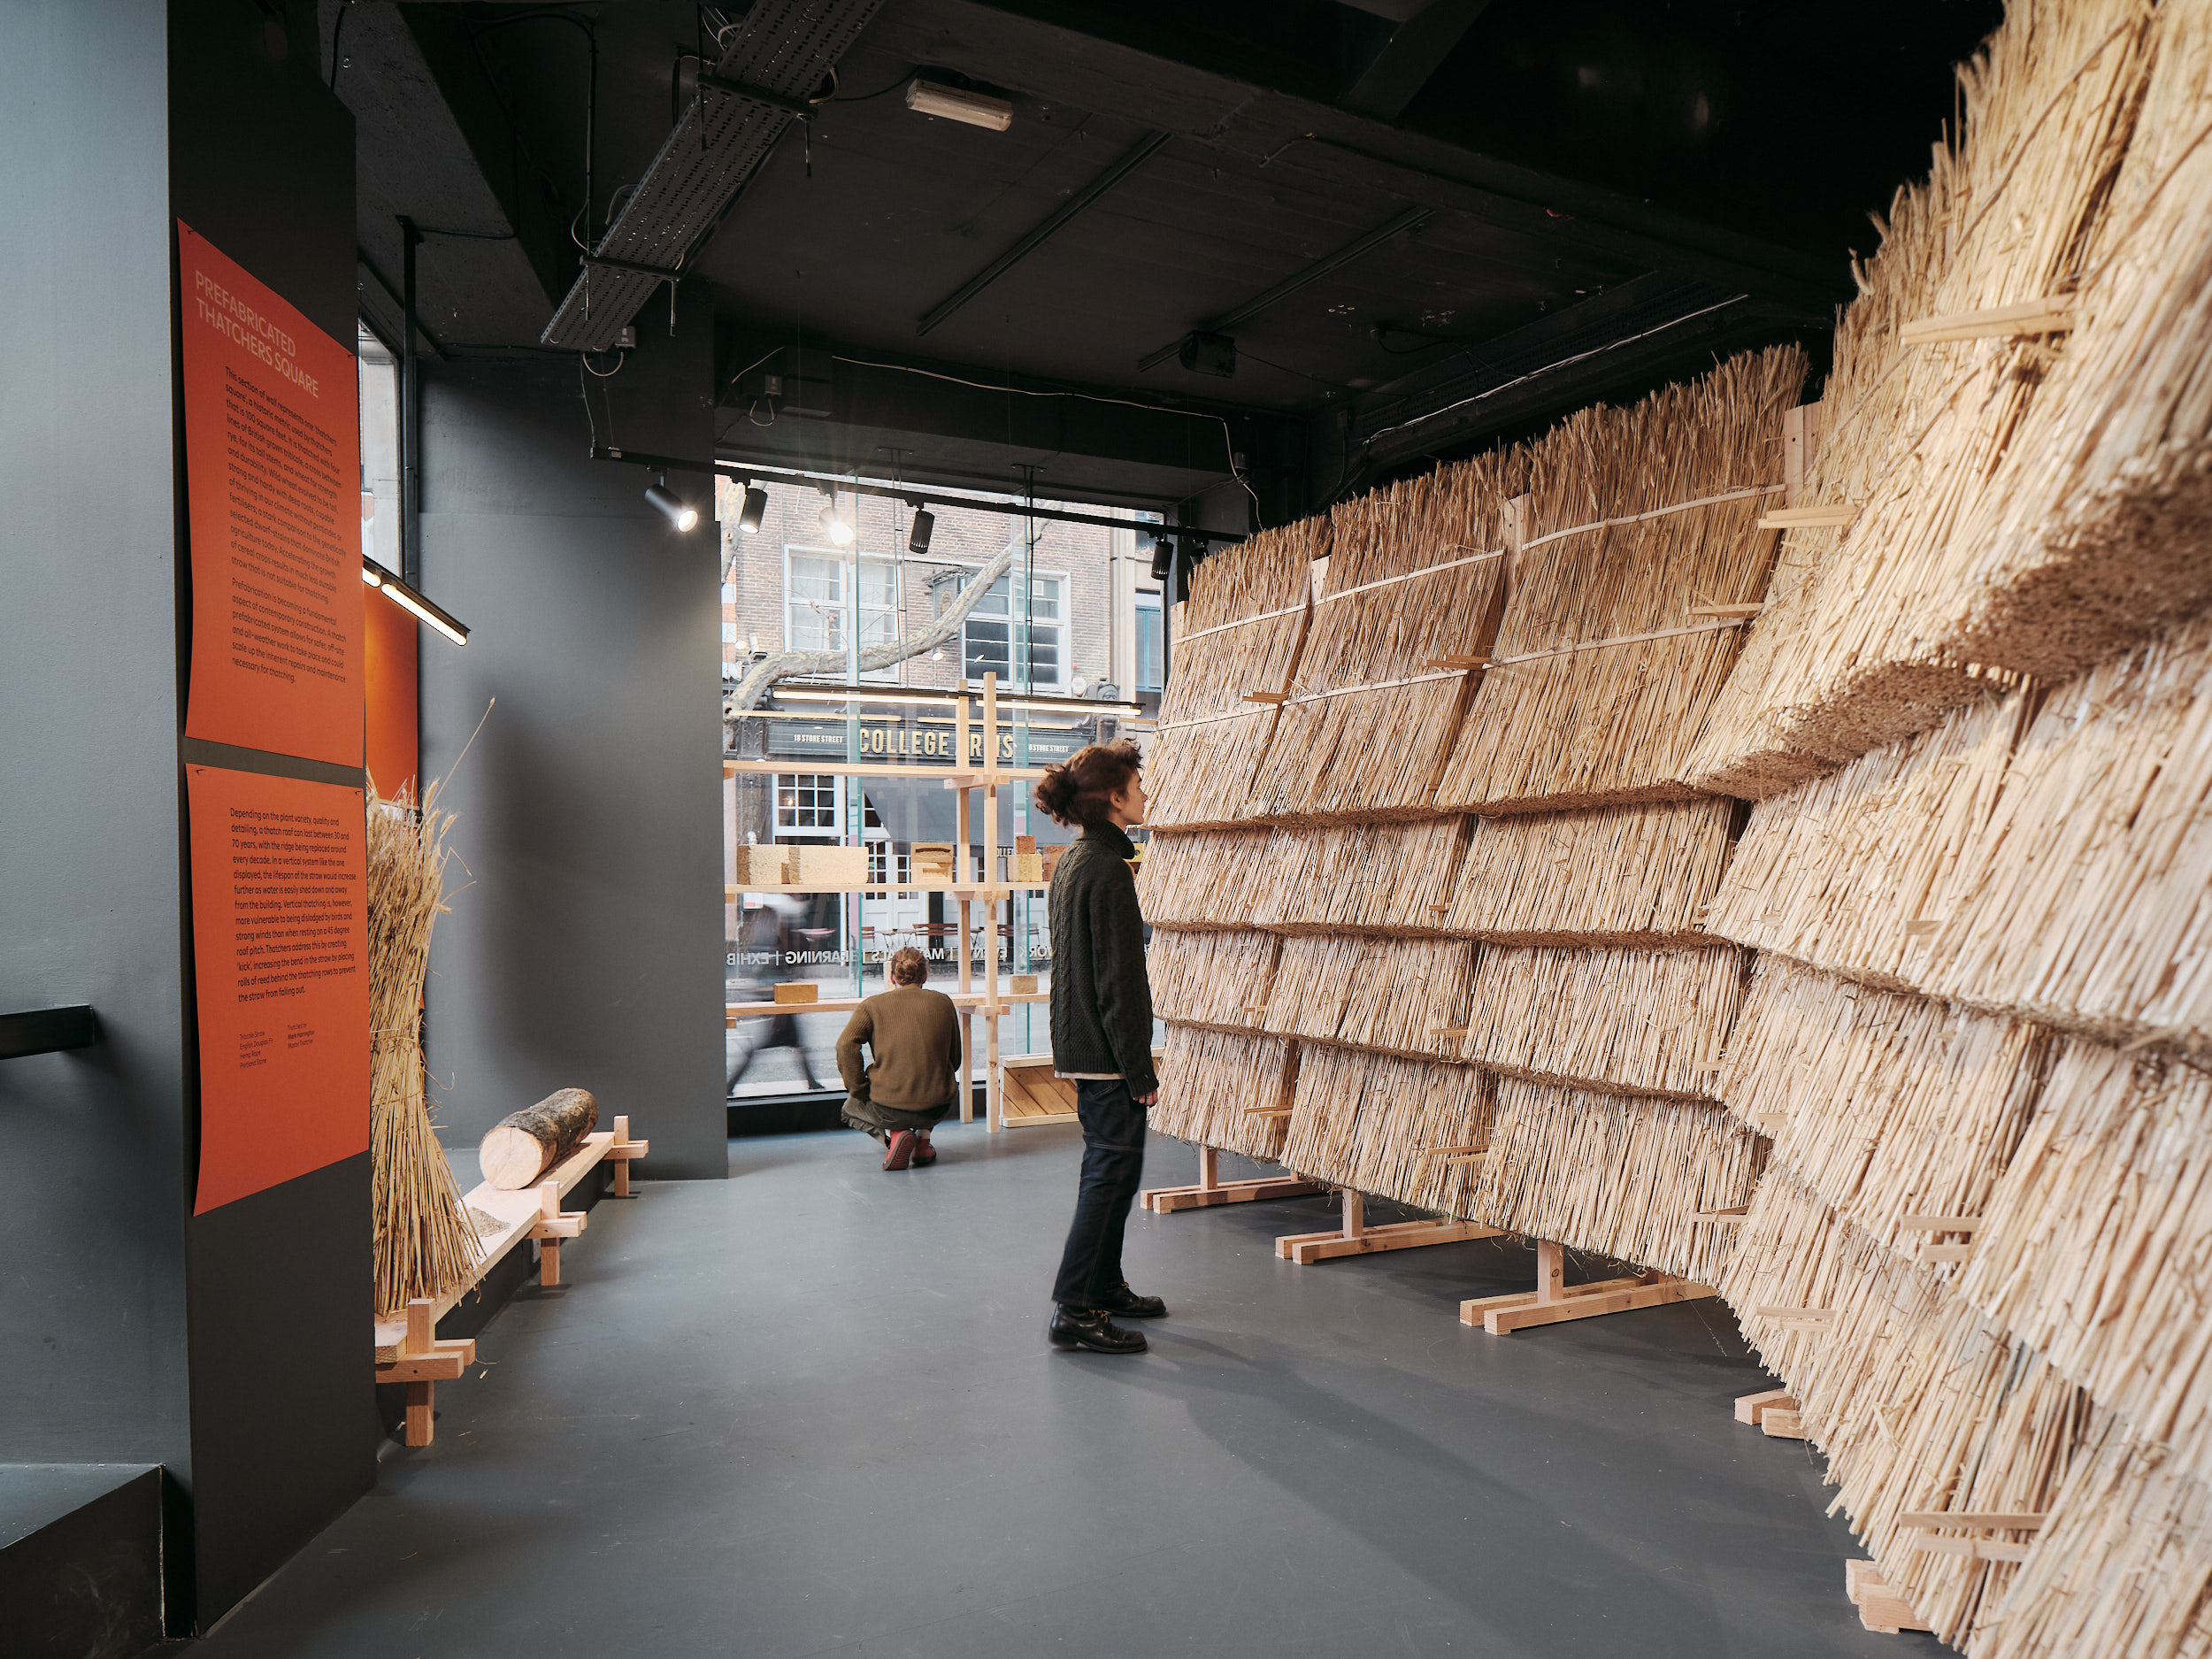 Installation view of the exhibition “Homegrown: Building a Post-carbon Future” at London’s Building Centre. (Photo: Henry Woide)